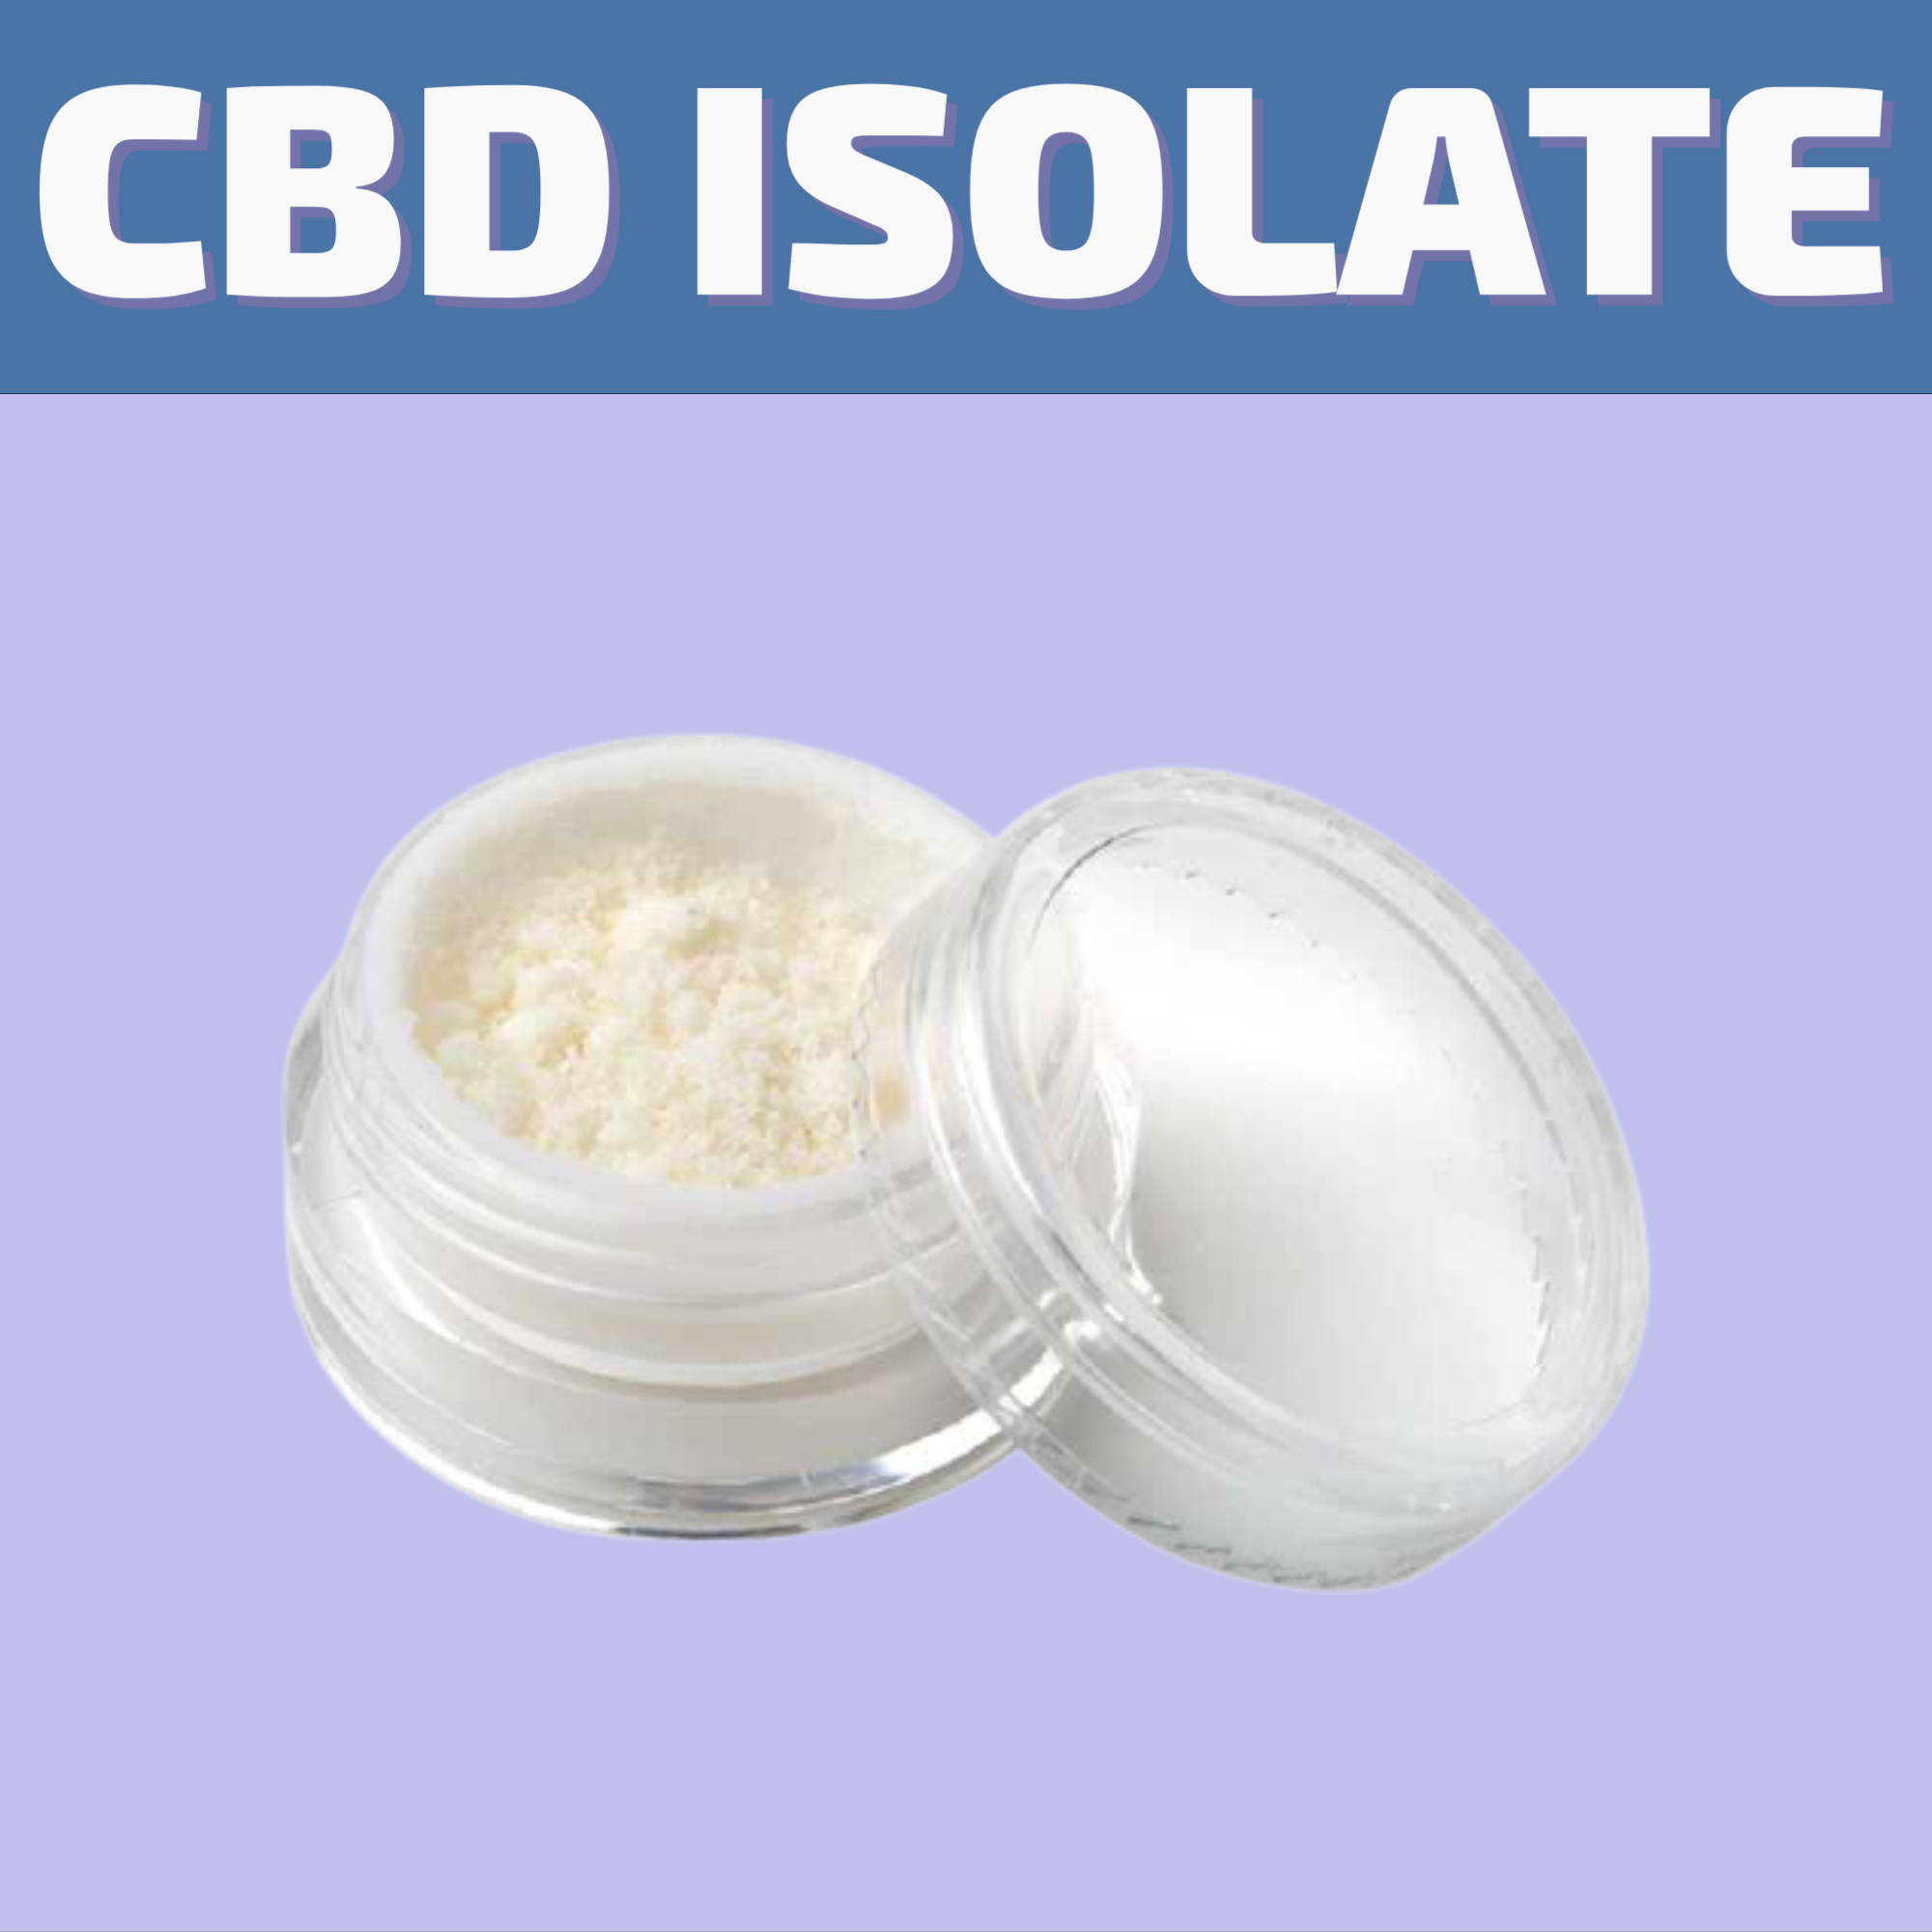 Shop the best selection of CBD Isolate and CBD Oil for same day delivery or pick it up at our dispensary on 580 Academy Road.  